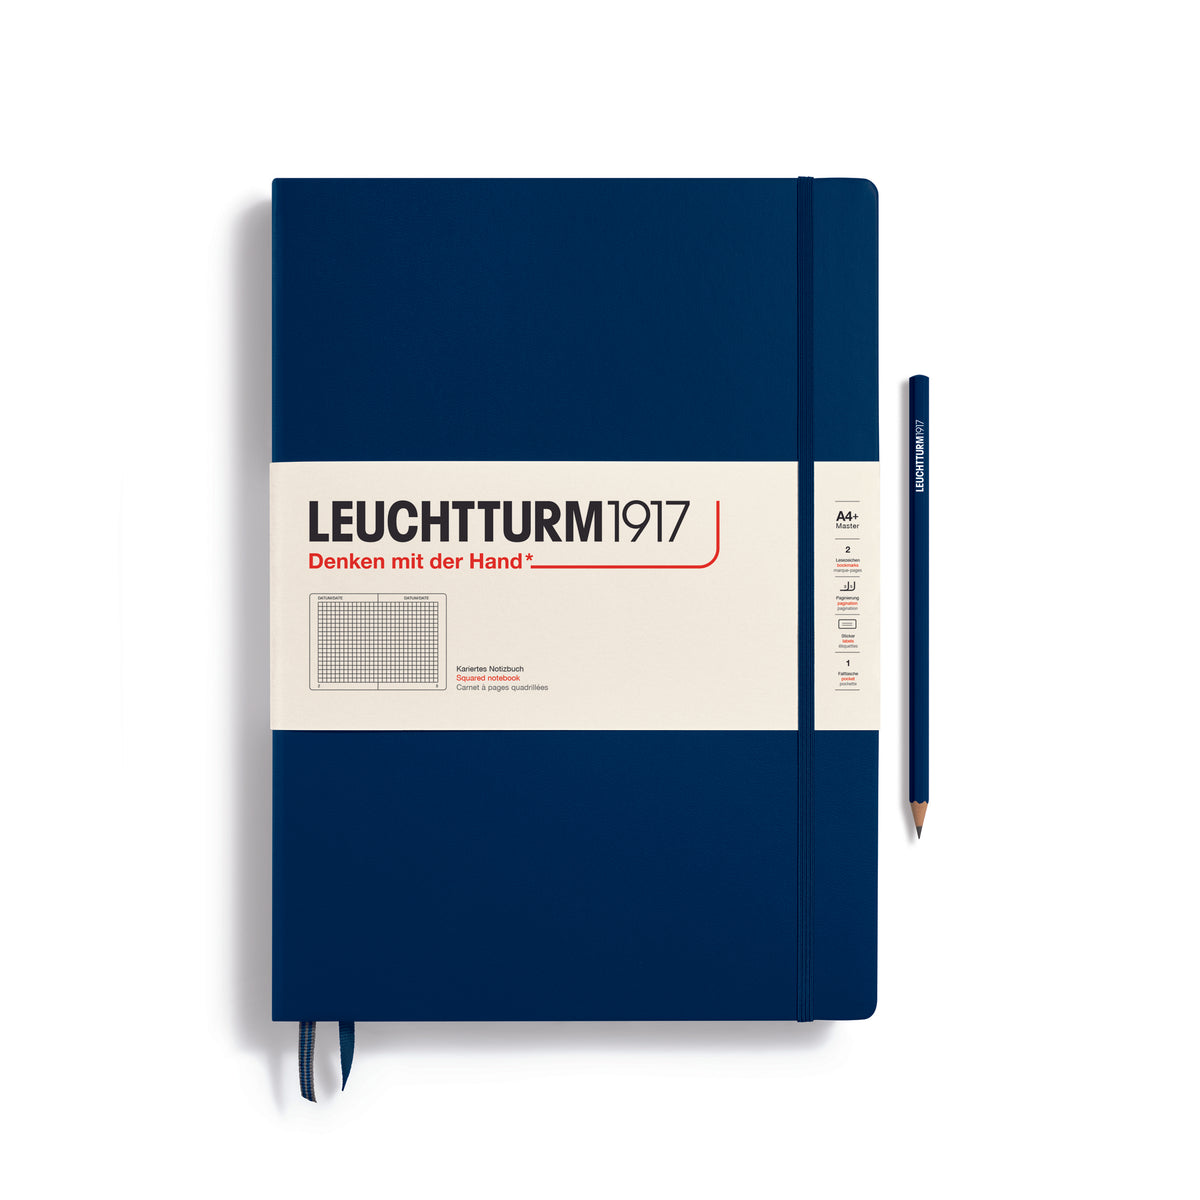 A large dark blue notebook with a white paper band around it with the logo of the brand Leuchtturm1917. Below this is an image of the page ruling inside - in this case, squared. It has two page marker ribbons showing at the bottom near the binding and a matching colour elastic notebook closure holding it neatly together. A dark blue Leuchtturm pencil is shown at the side of the book.